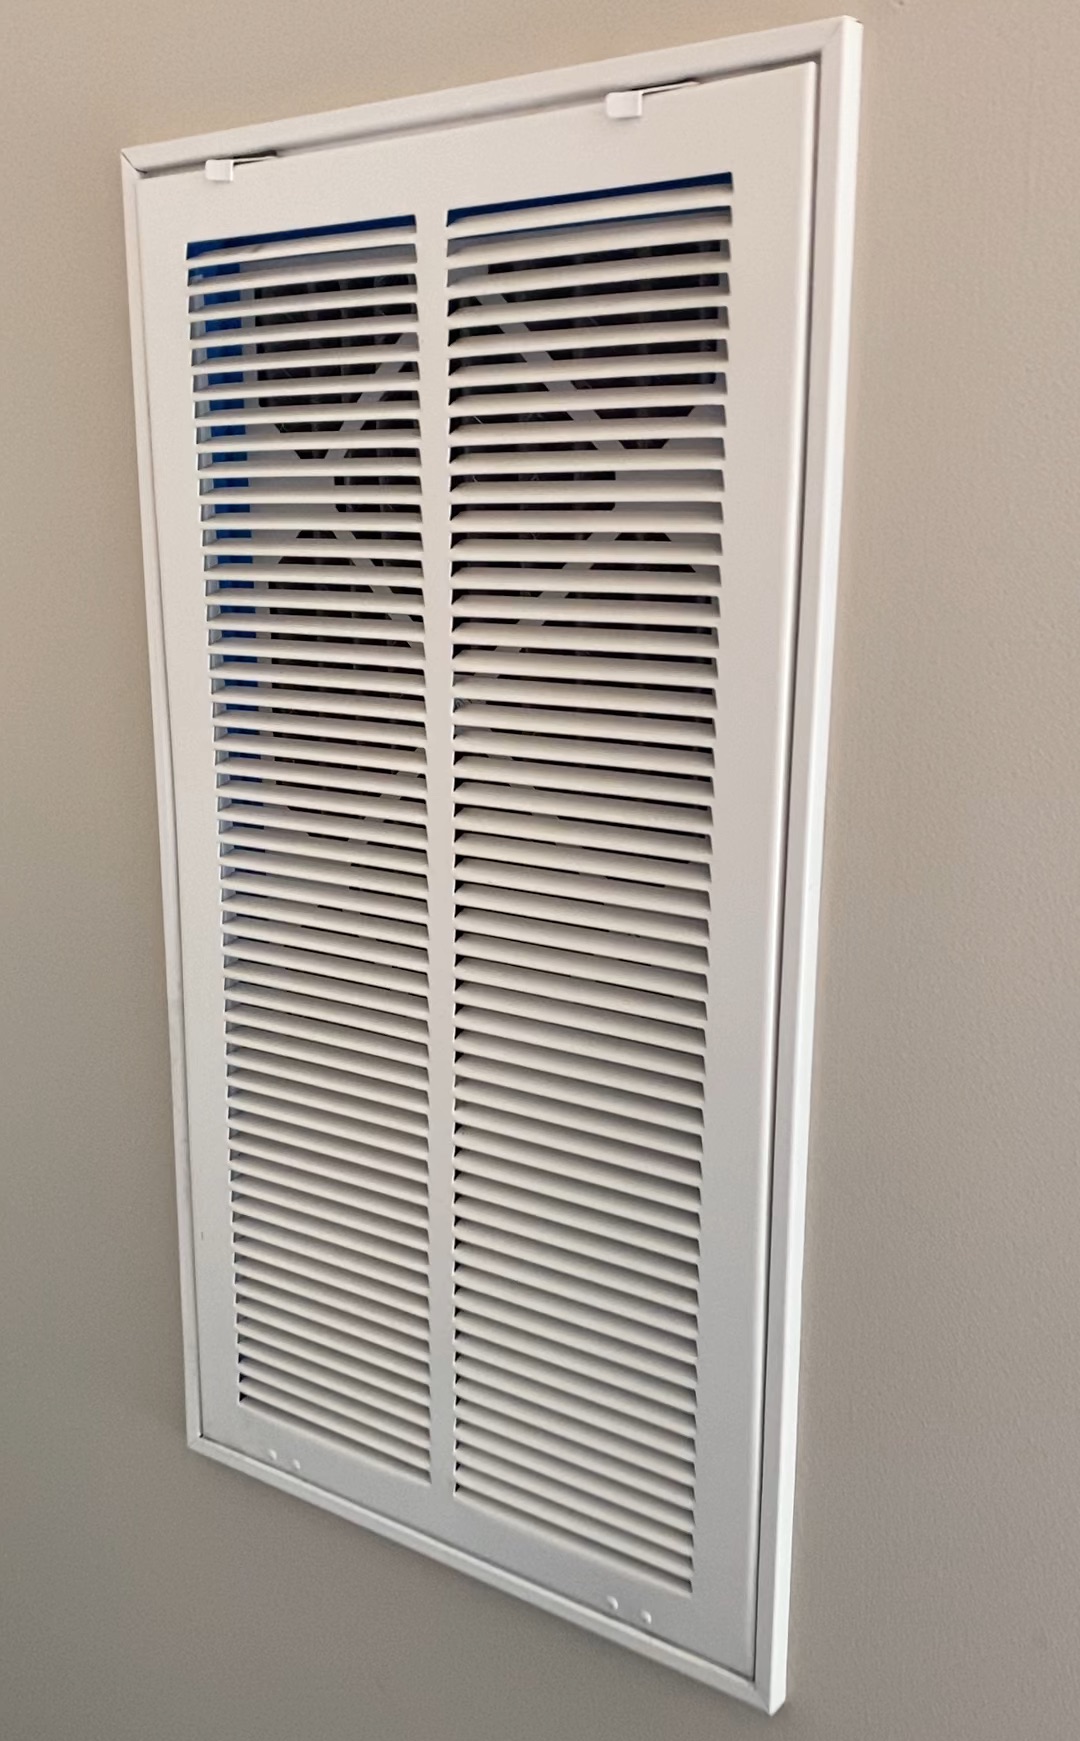 The vent for an apartment air intake